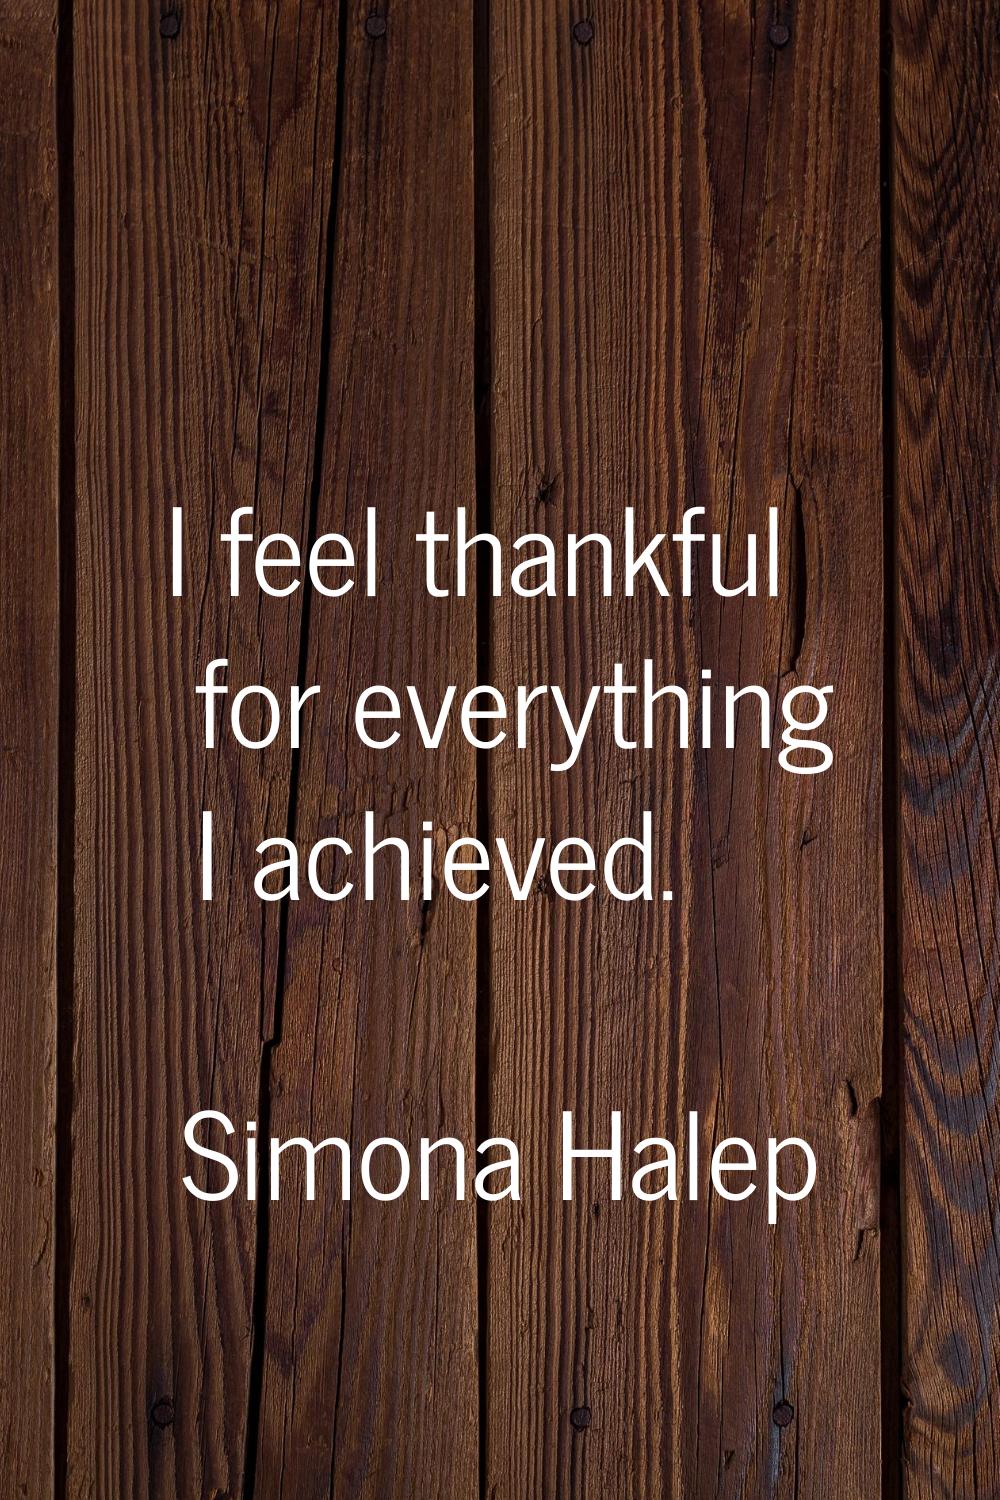 I feel thankful for everything I achieved.